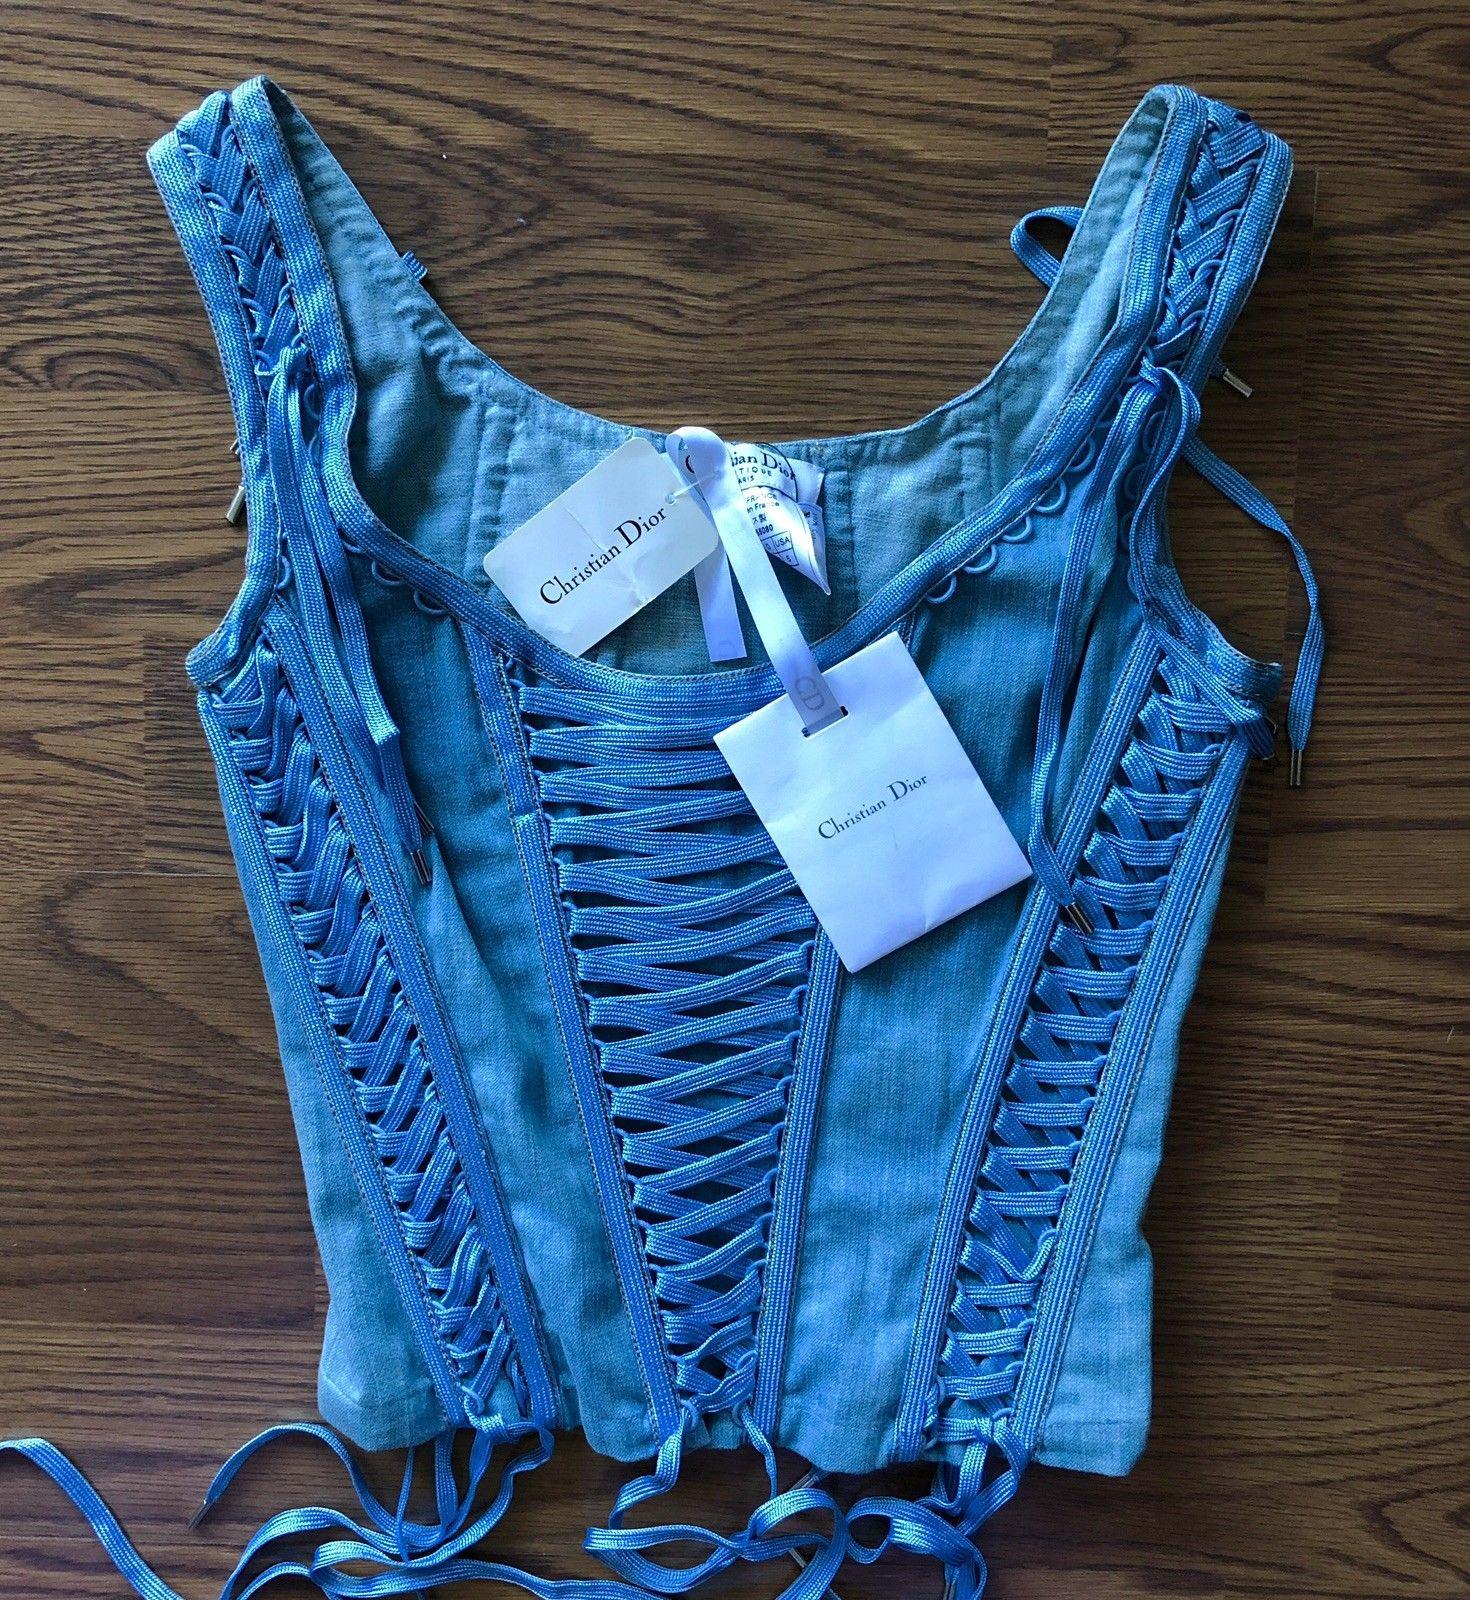 New Christian Dior by John Galliano S/S 2002 Denim Bustier Corset Top FR 38

Medium wash blue Christian Dior denim corset with lace-up detail throughout, boning at interior and side zip closure.
